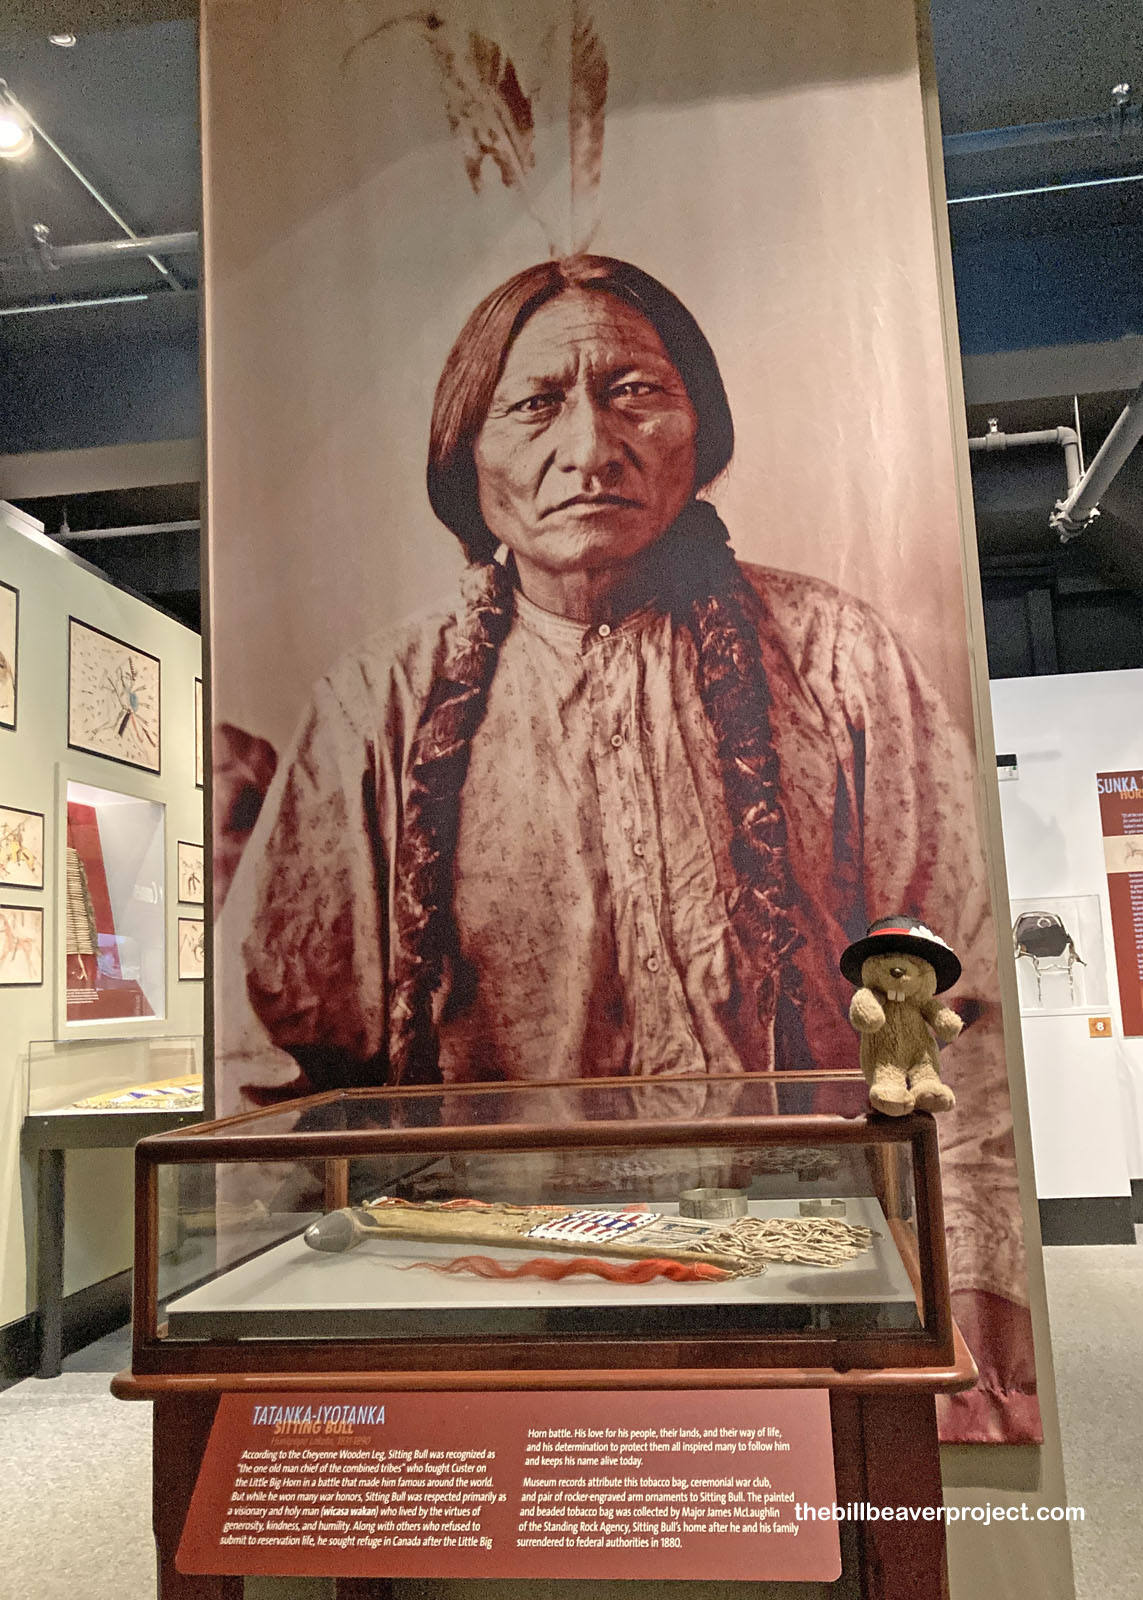 Some of Sitting Bull's possessions!